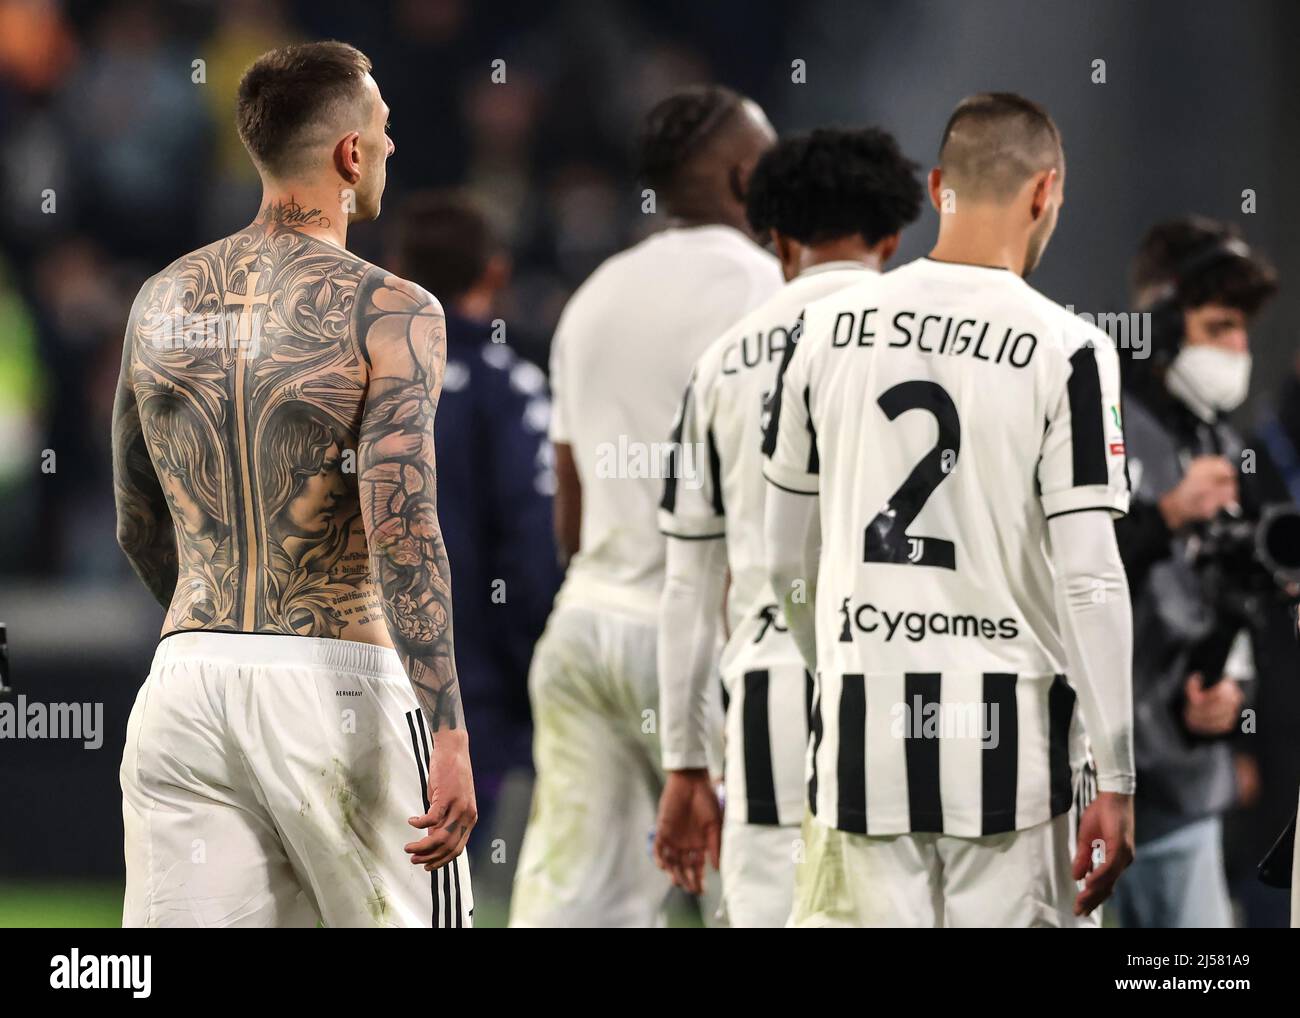 Turin, Italy, 20th April 2022. Federico Bernardeschi of Juventus leaves the field of without his jersey showing his covering his entire back following final whistle of the Coppa Italia